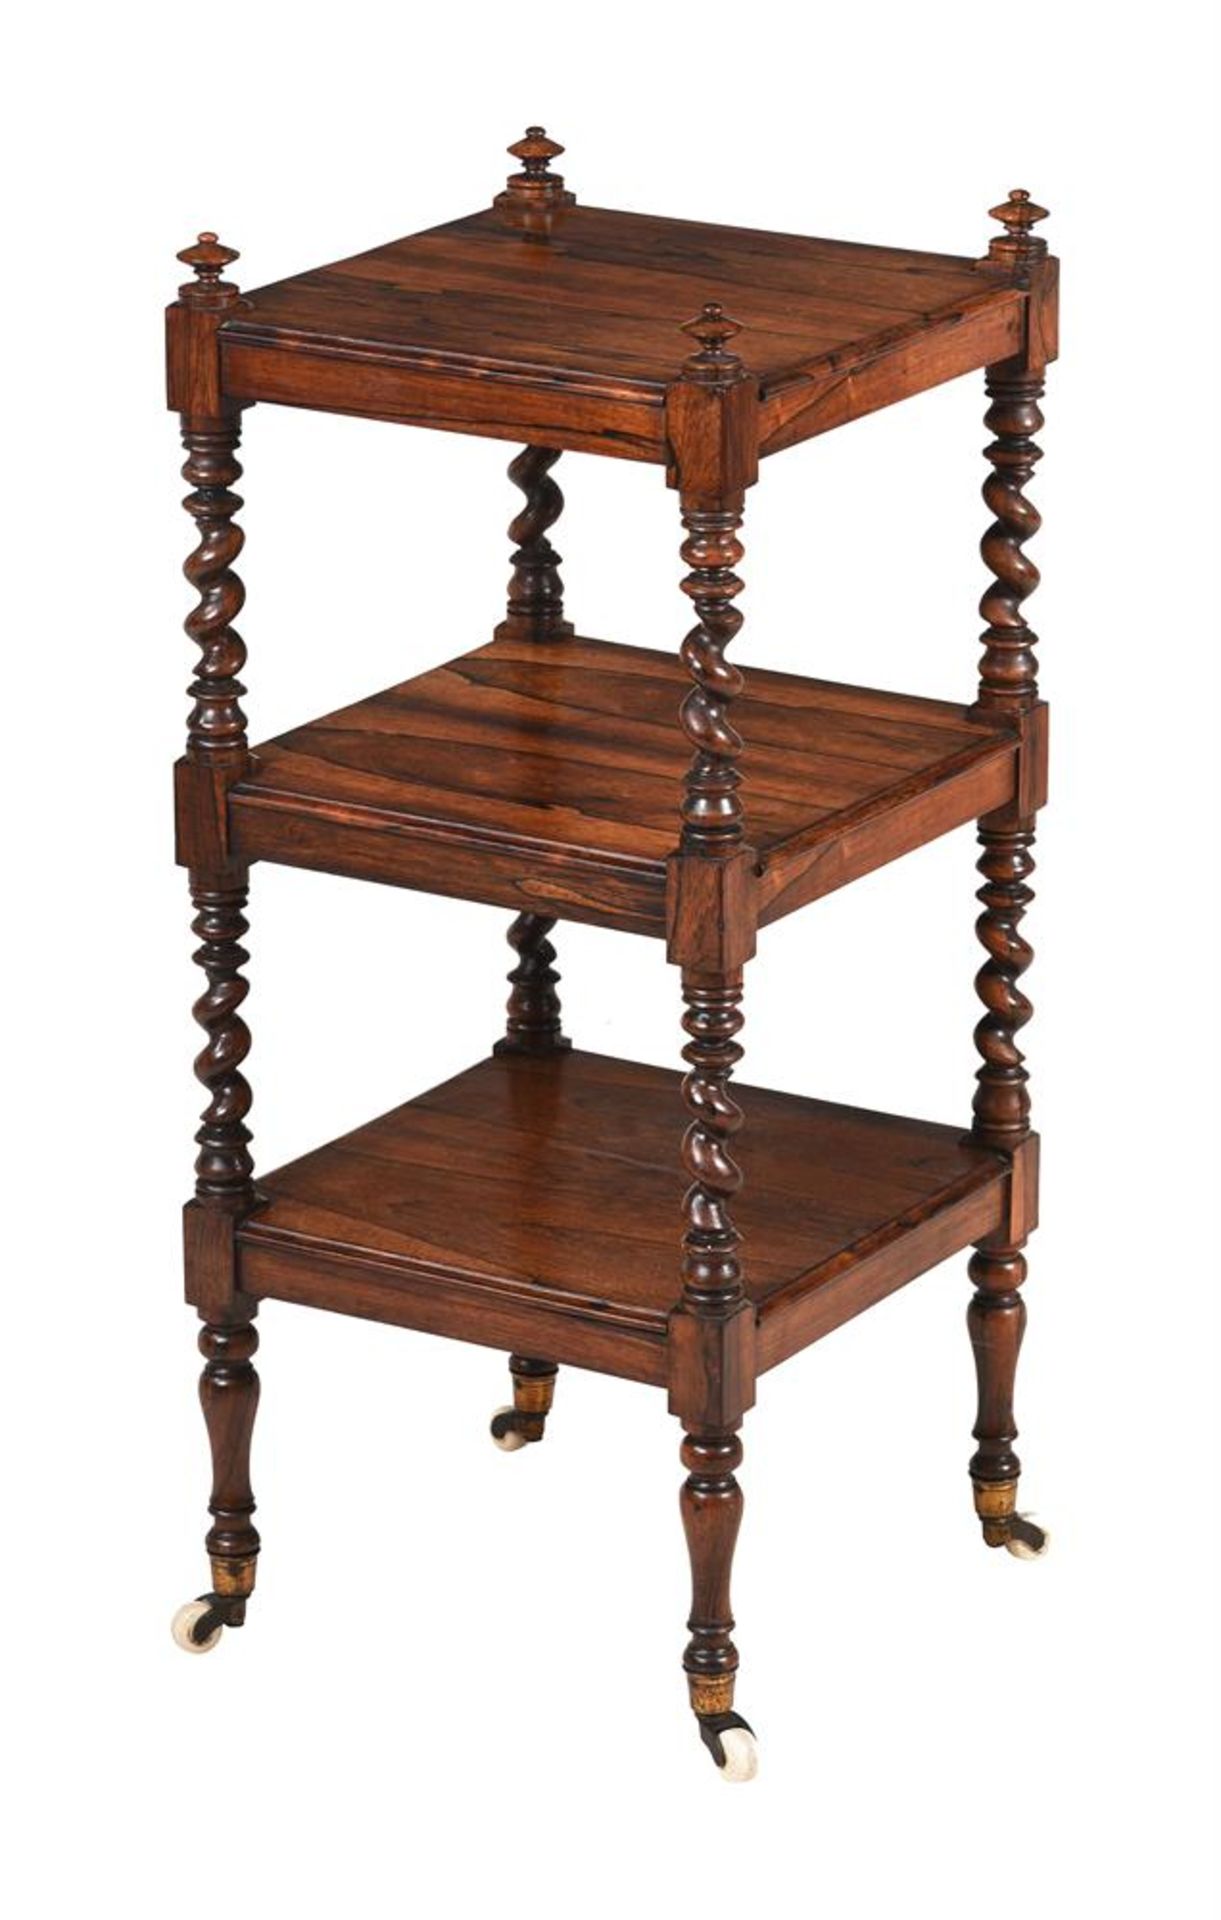 Y AN EARLY VICTORIAN ROSEWOOD ETAGERE